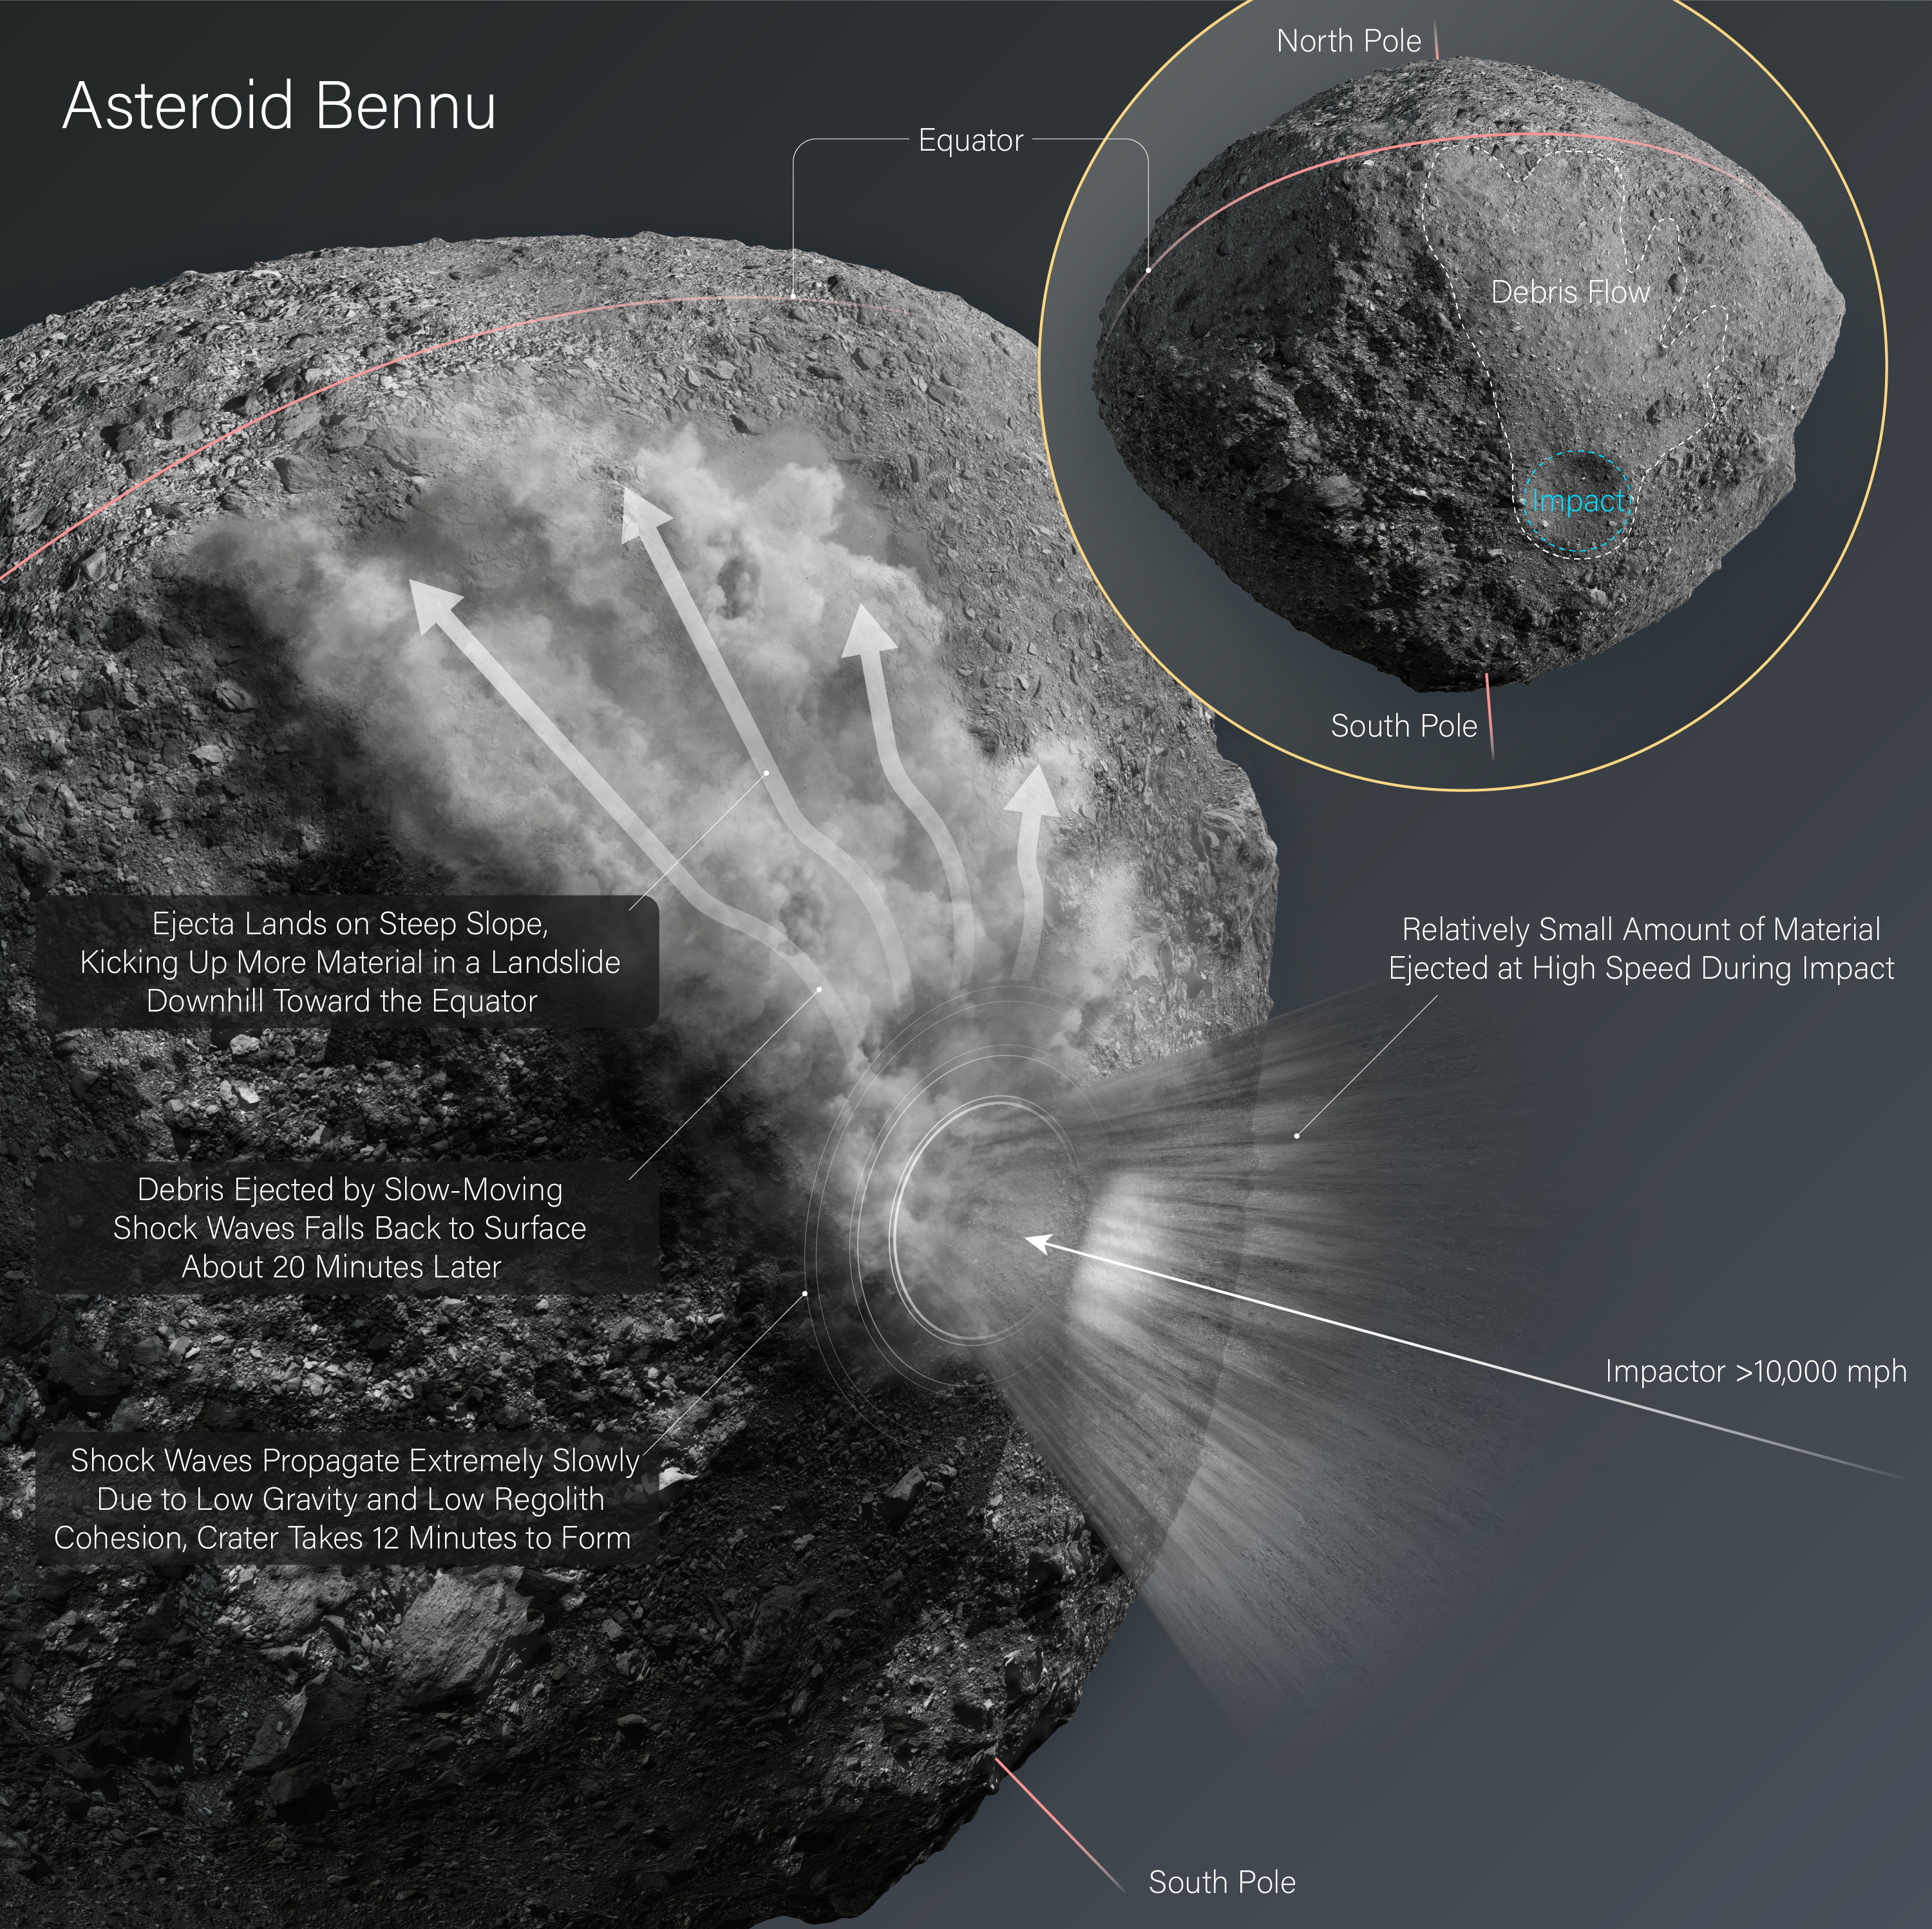 Three-dimensional illustration of asteroid Bennu, showing with arrows the direction of a landslide on its surface and a small inset of the asteroid at the top showing the aftermath 